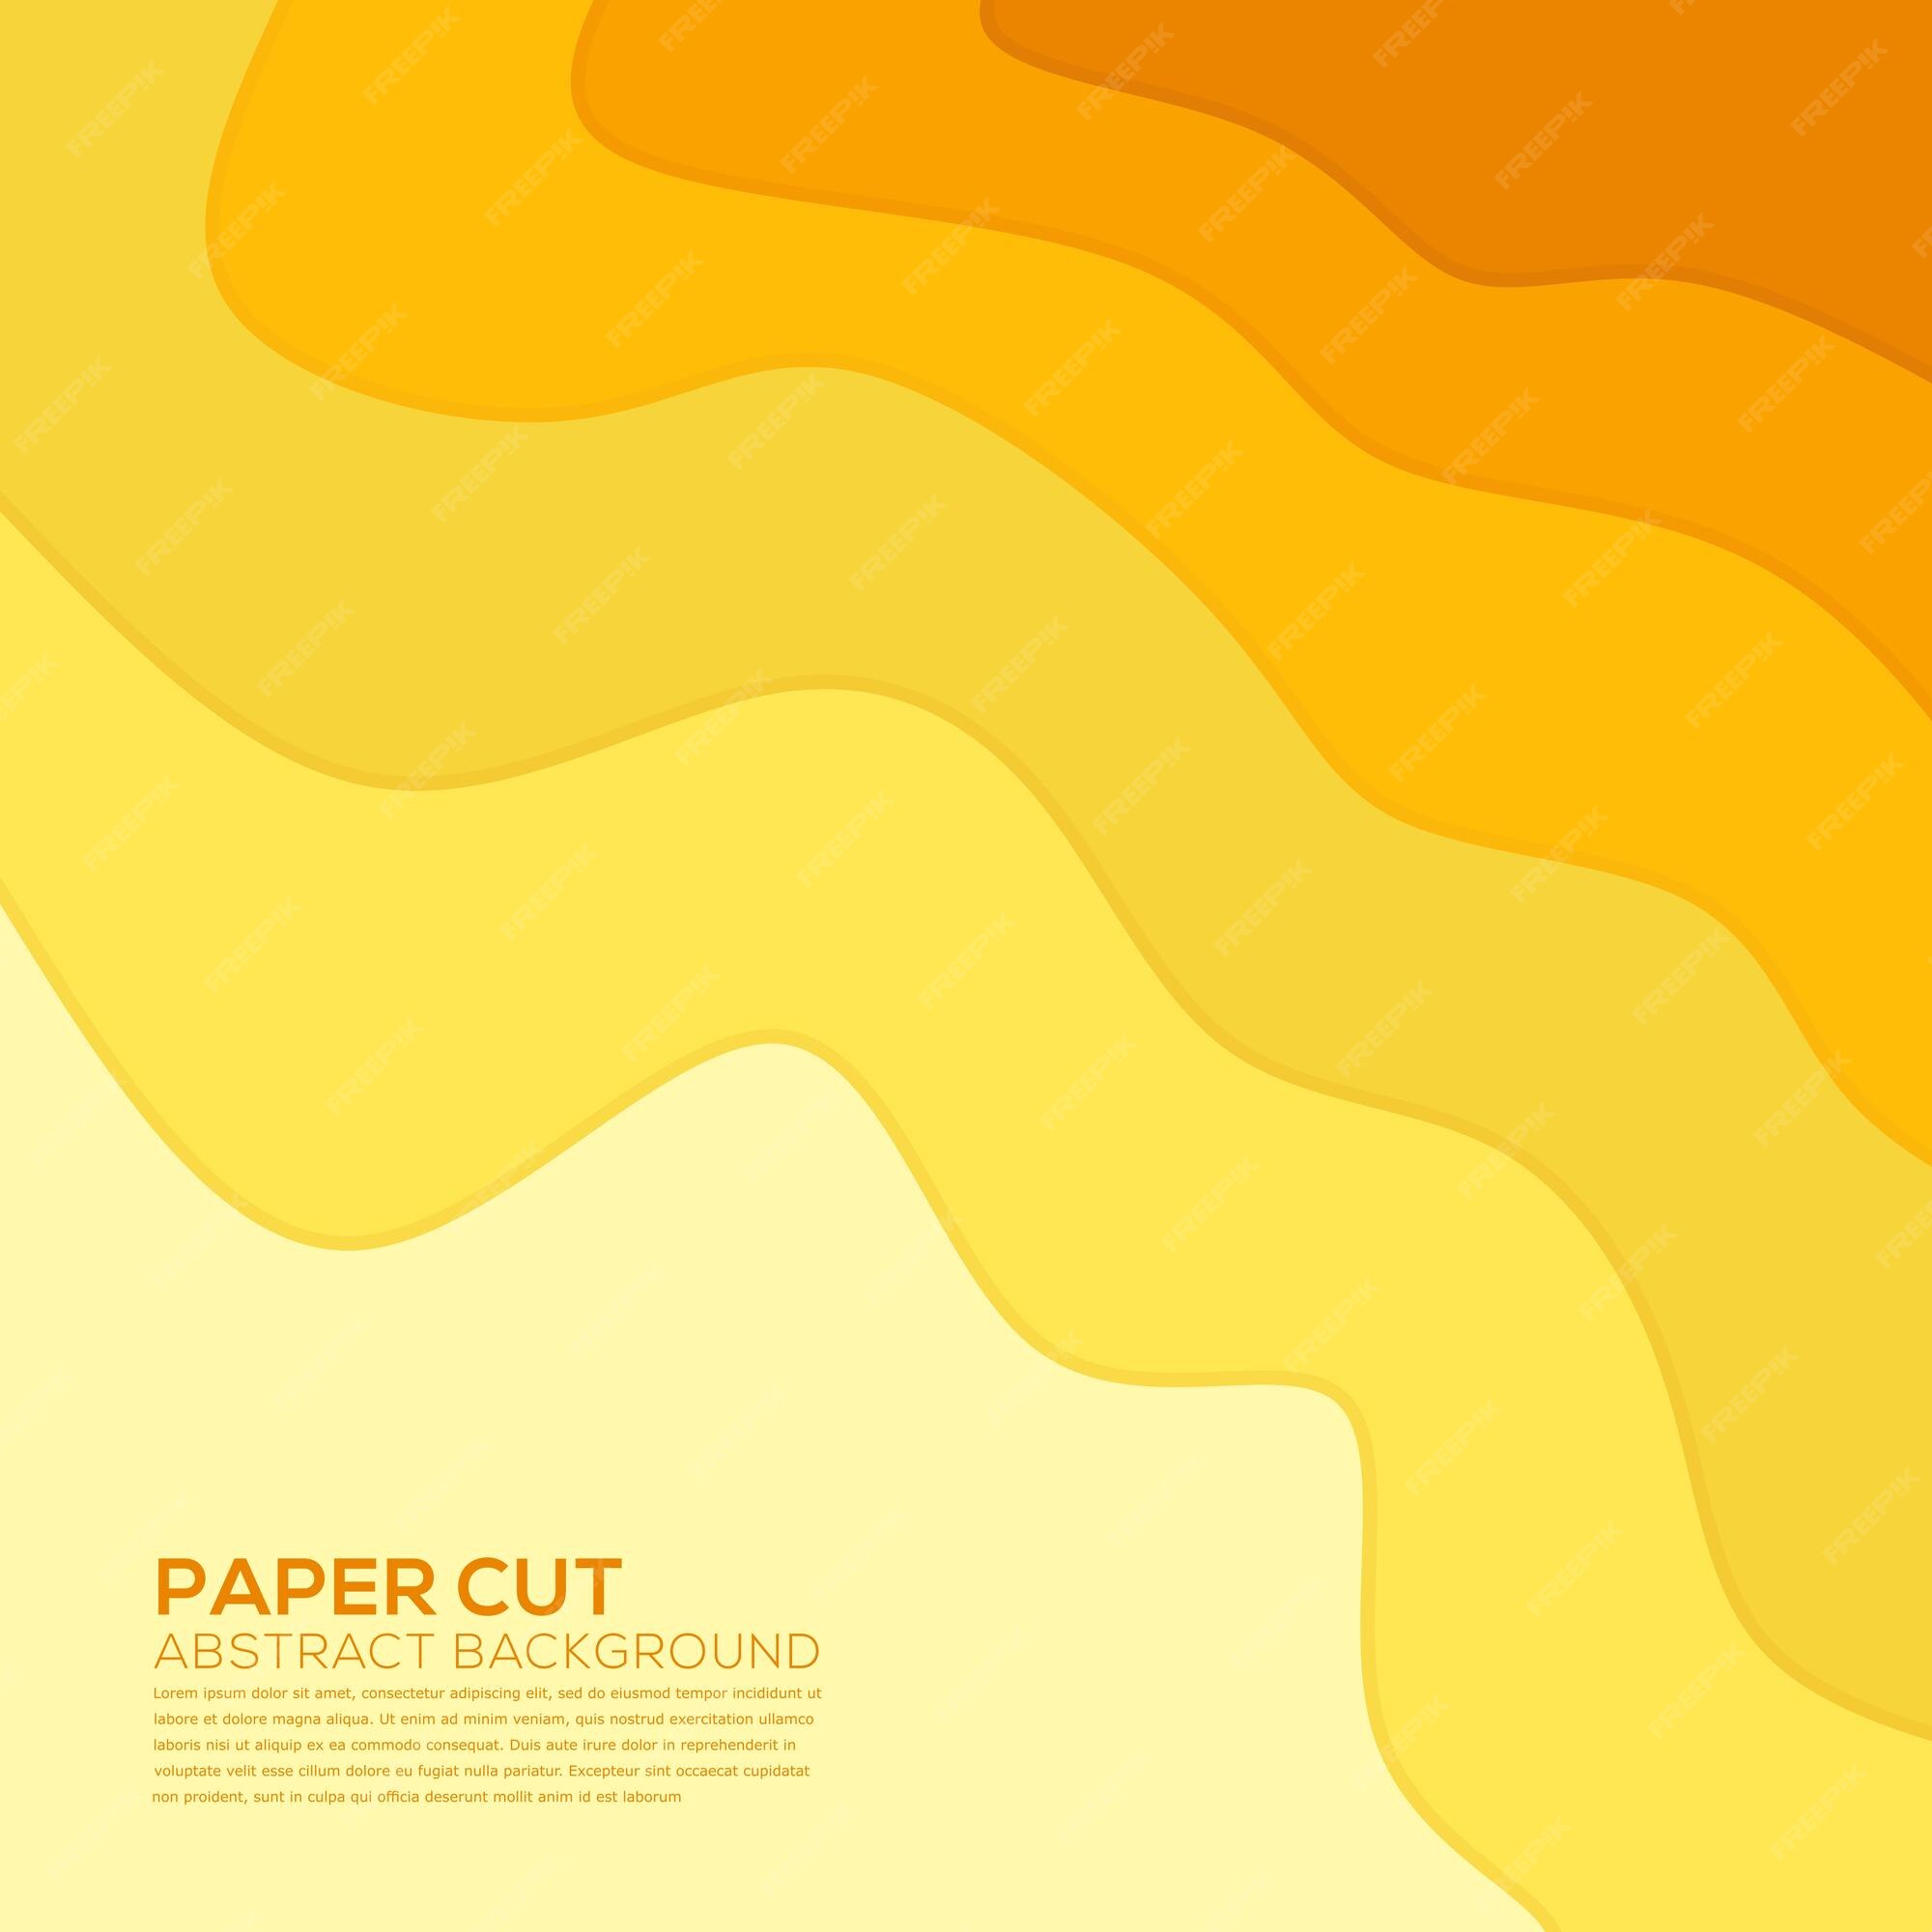 Free Vector | Paper cut background yelow